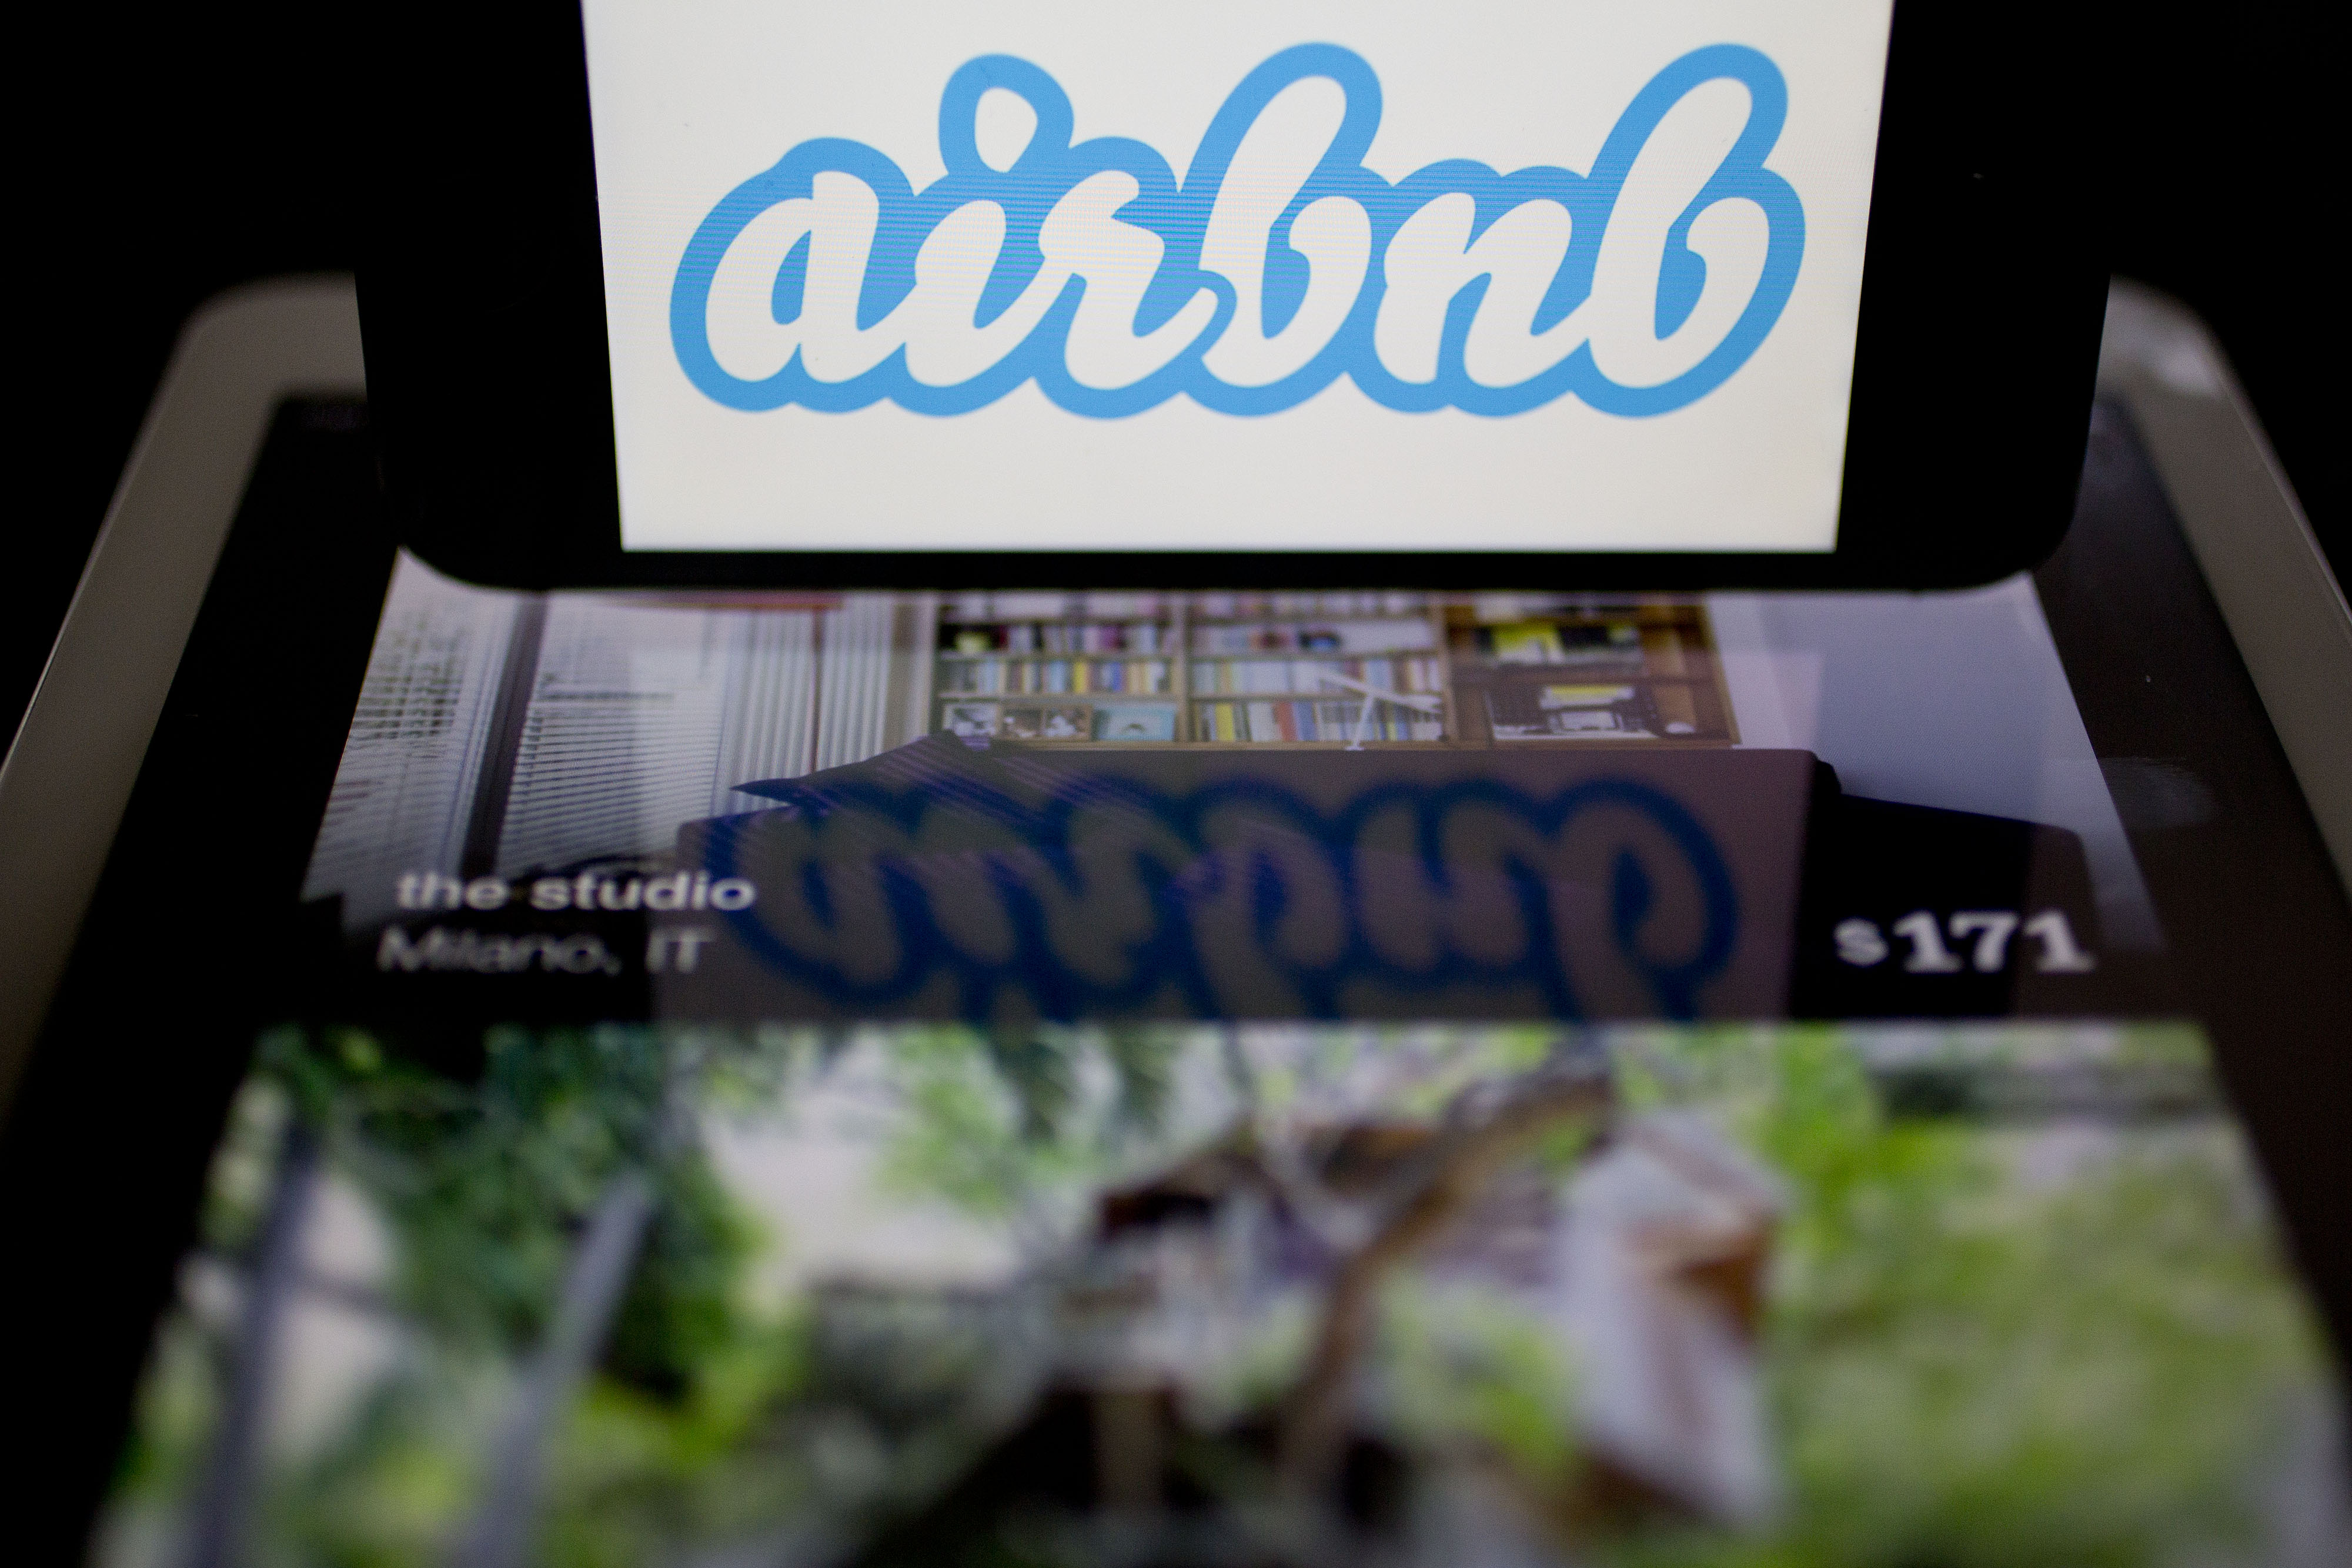 The Airbnb Inc. logo and application are displayed on an Apple Inc. iPhone and iPad in this arranged photograph in Washington, D.C., U.S., on Friday, March 21, 2014. (Bloomberg/Getty Images)